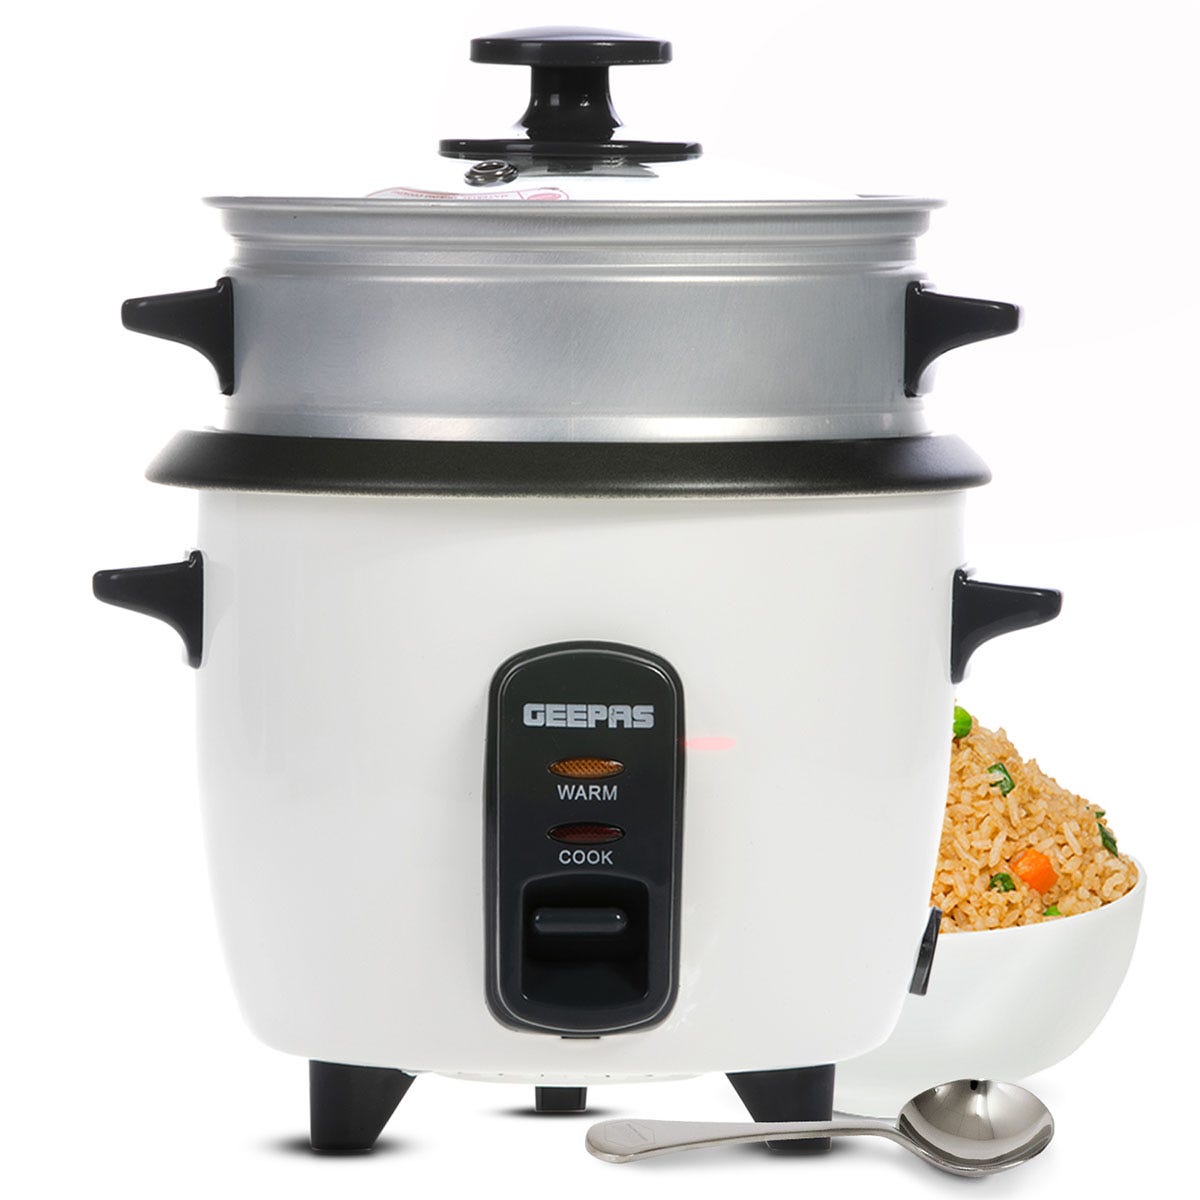 Geepas 0.6L 350W Rice Cooker with Steamer - White